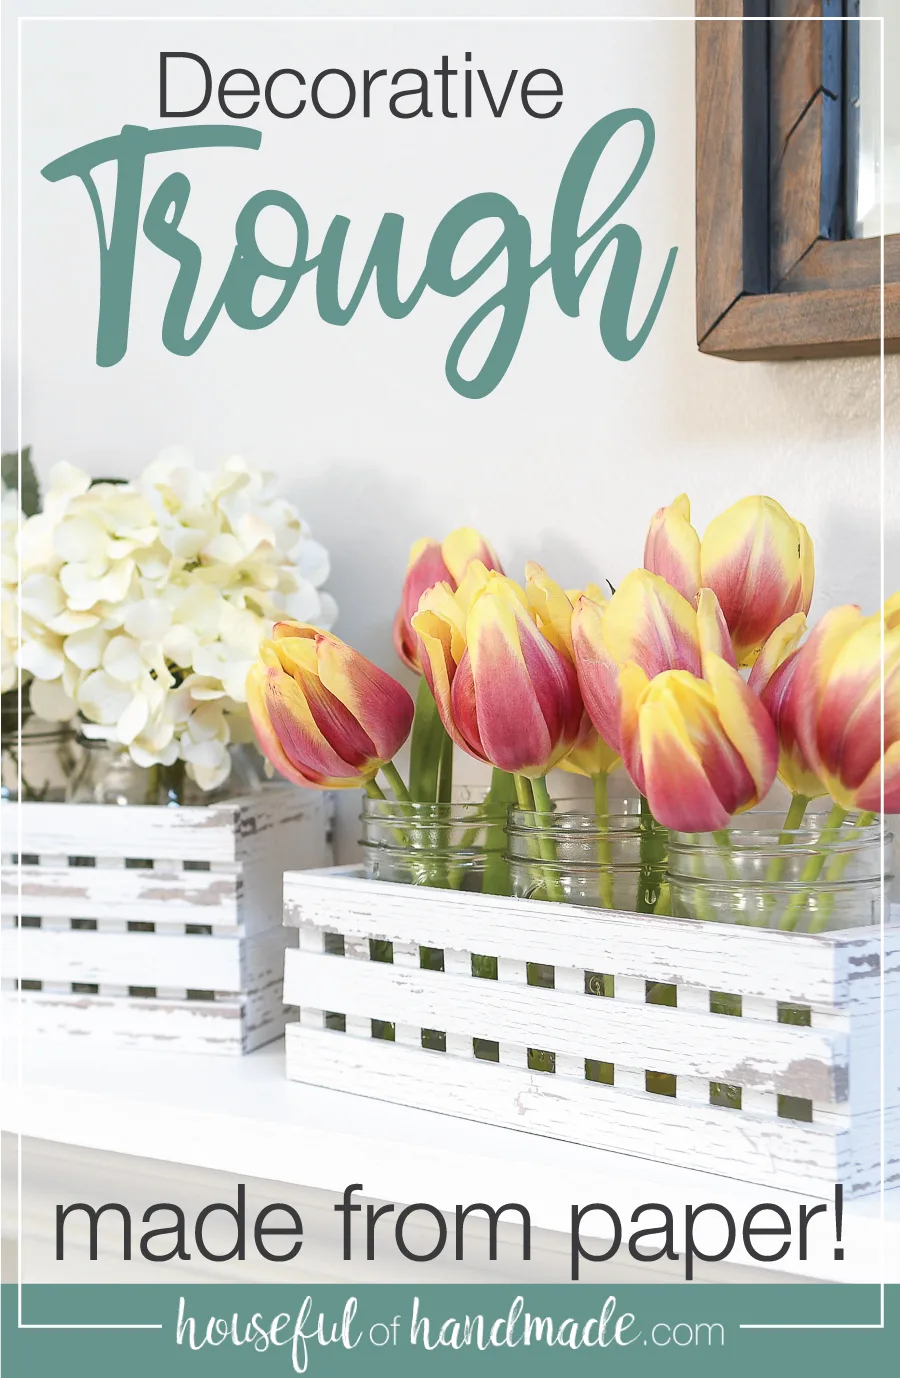 Farmhouse trough decor with flowers inside and text overlay.